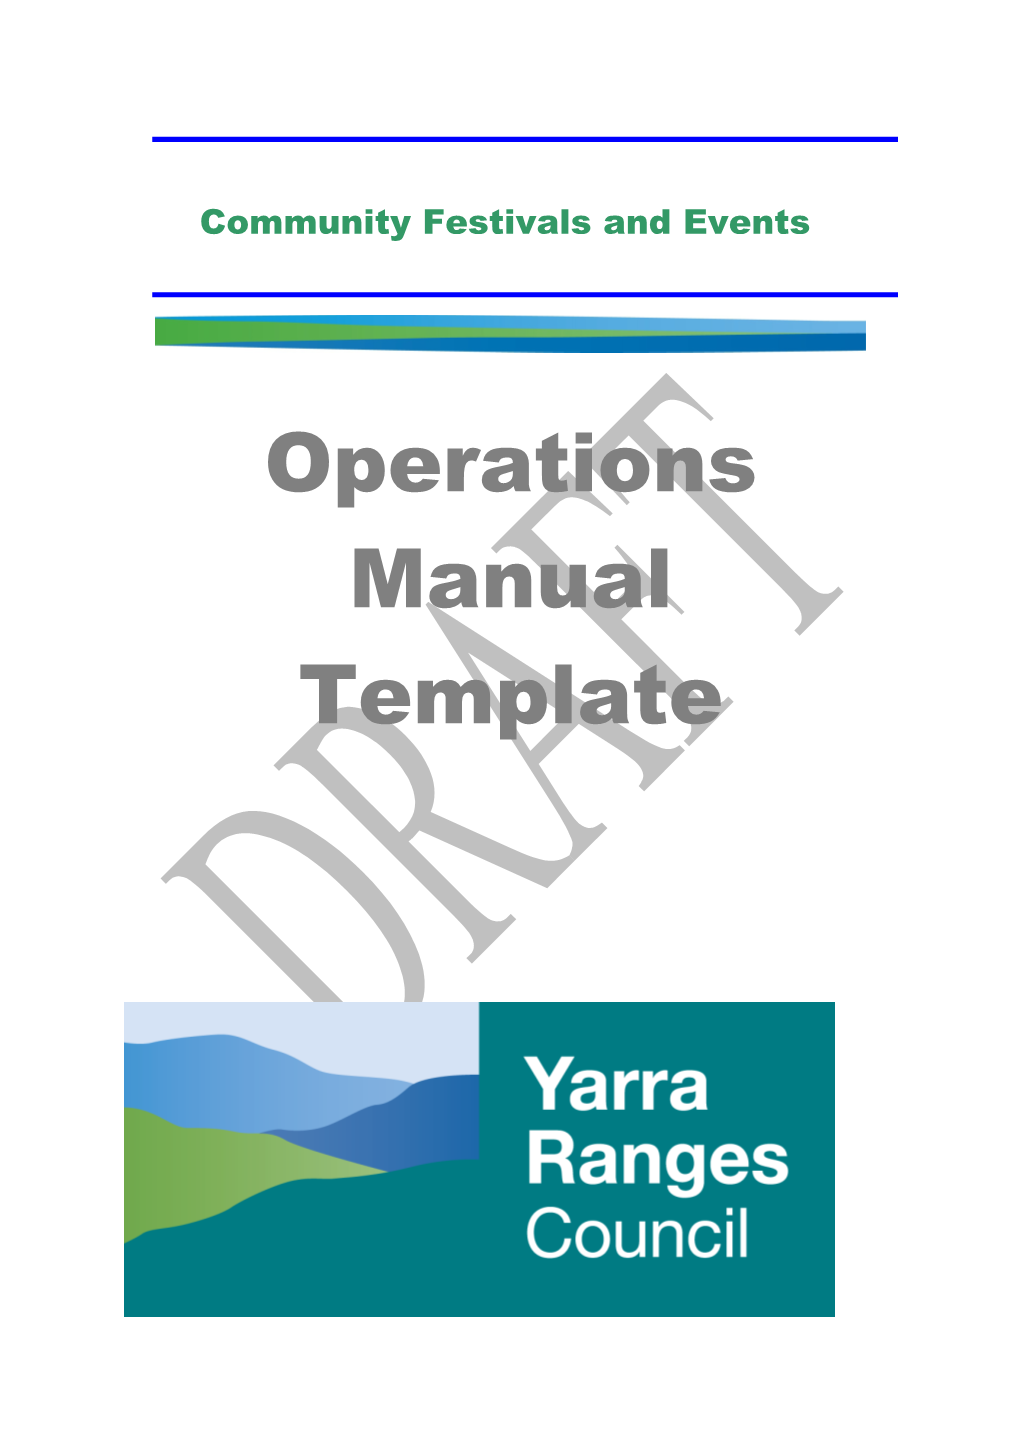 What Is an Operations Manual and Why Do I Need One?